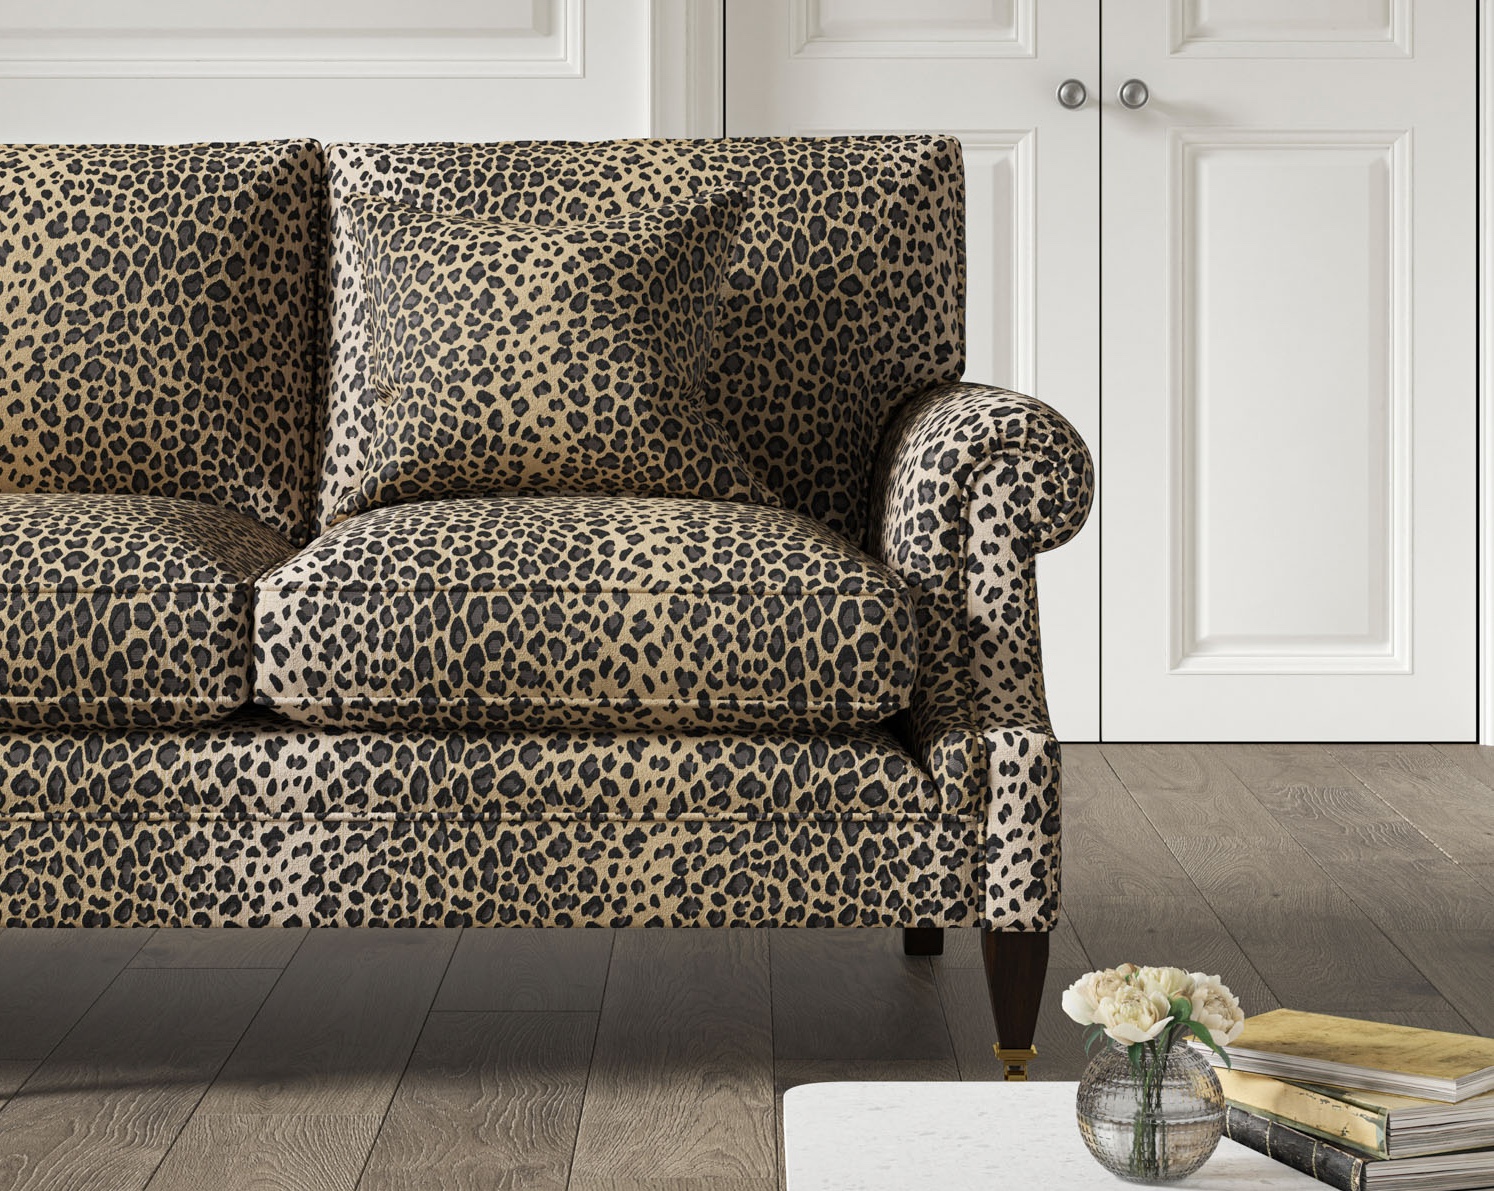 Leopard Sofas and Chairs